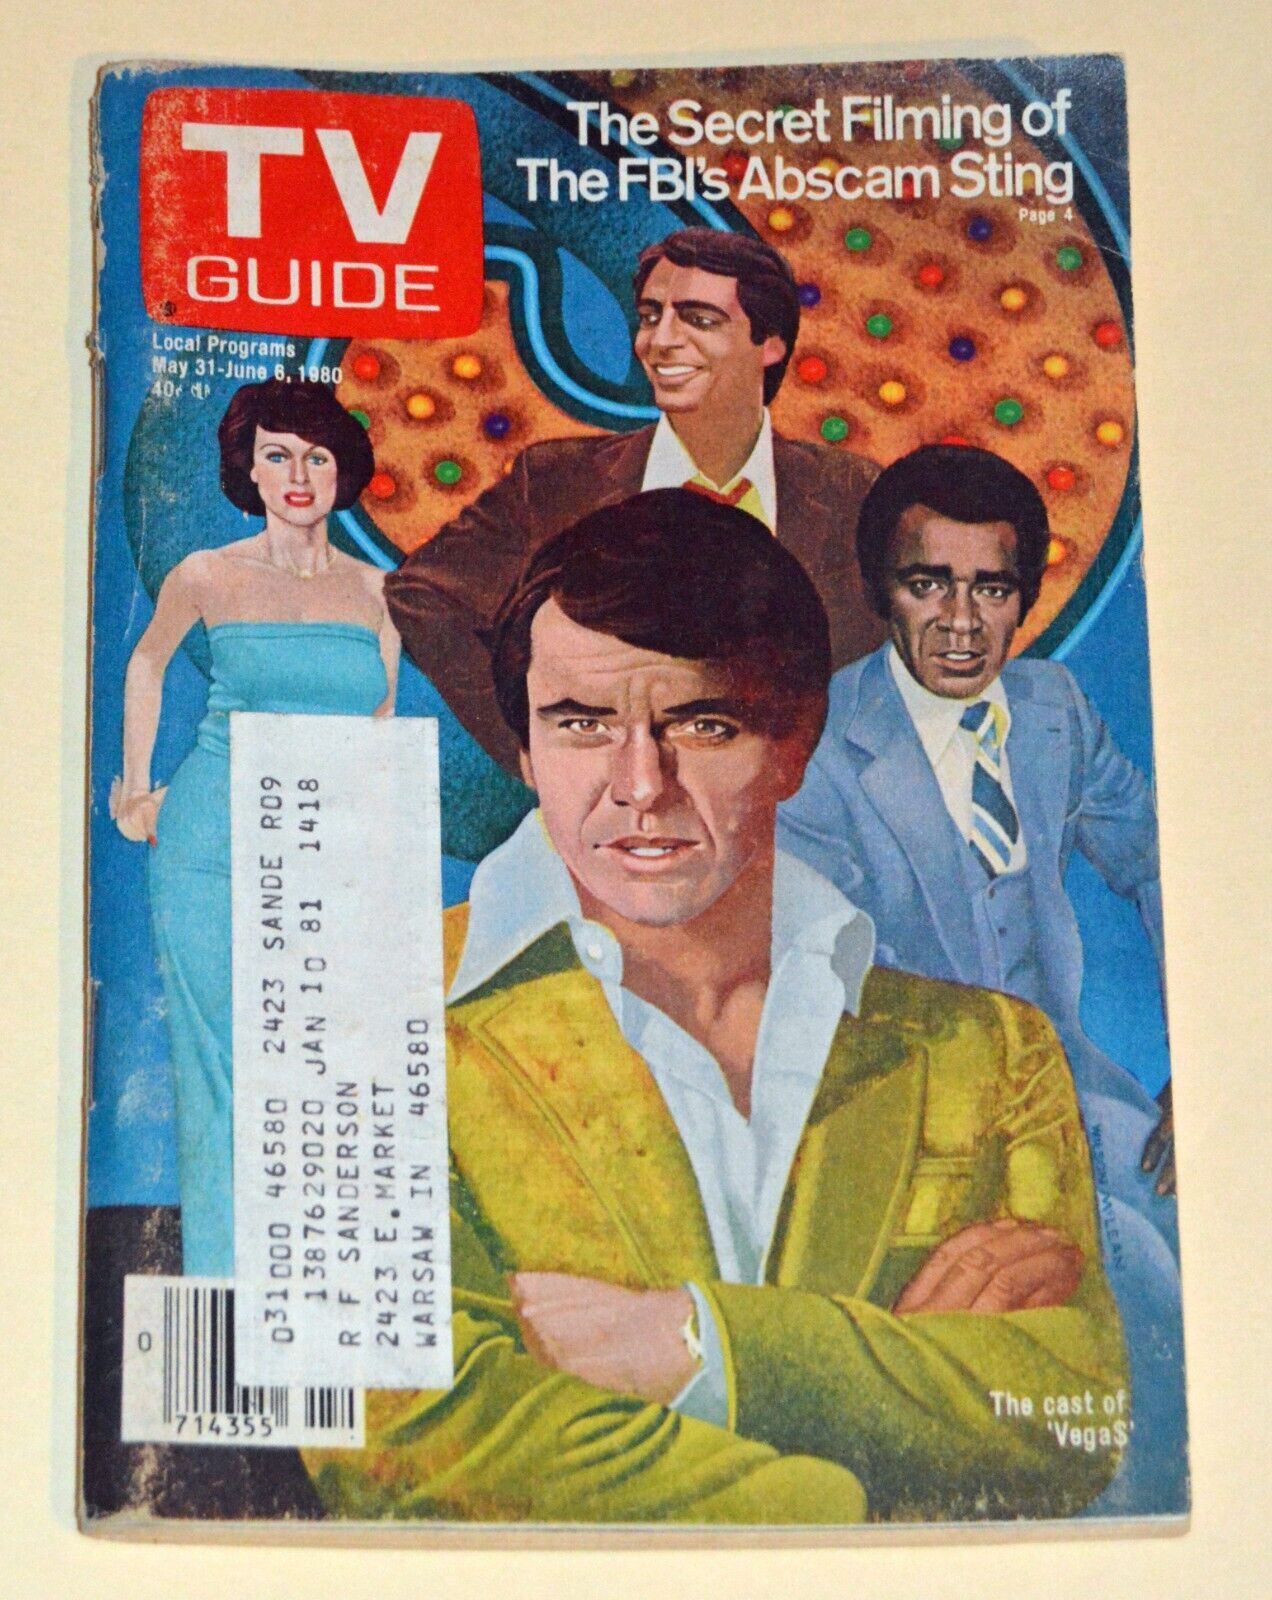 CLASSIC - Cast of \'VEGA$\' - ROBERT URICH - 1980 NORTHERN INDIANA TV Guide